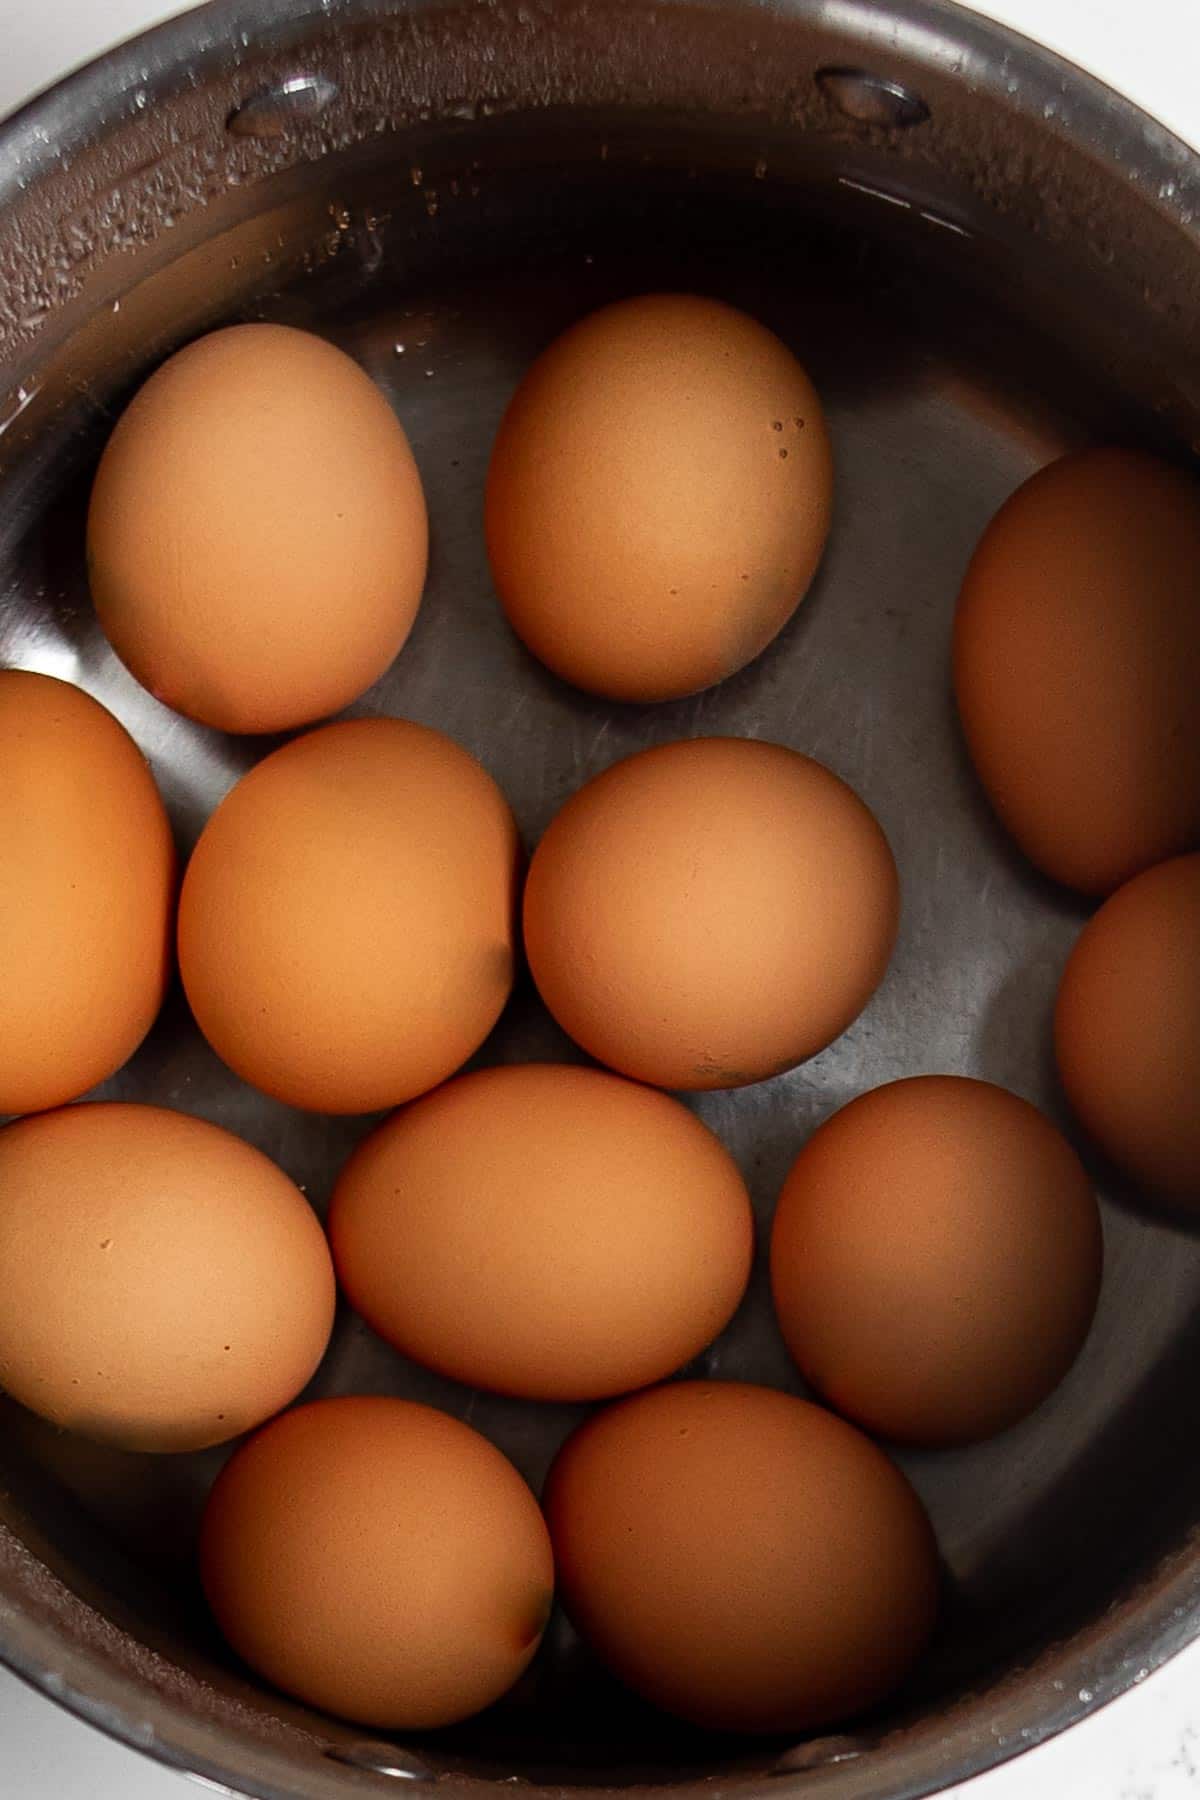 a dozen eggs in a pot of water on the stove.